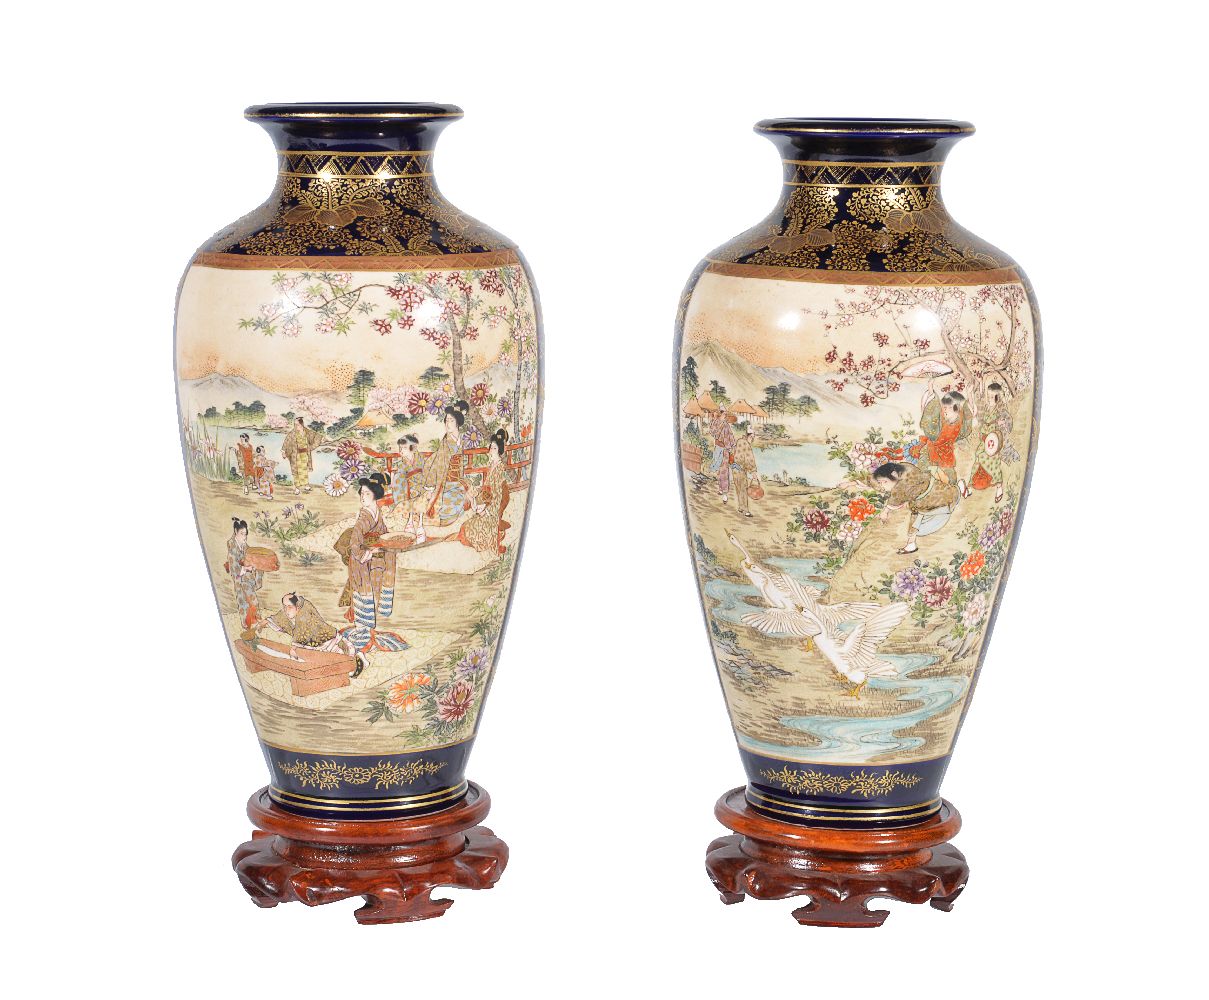 A Pair of Satsuma Pottery Vases